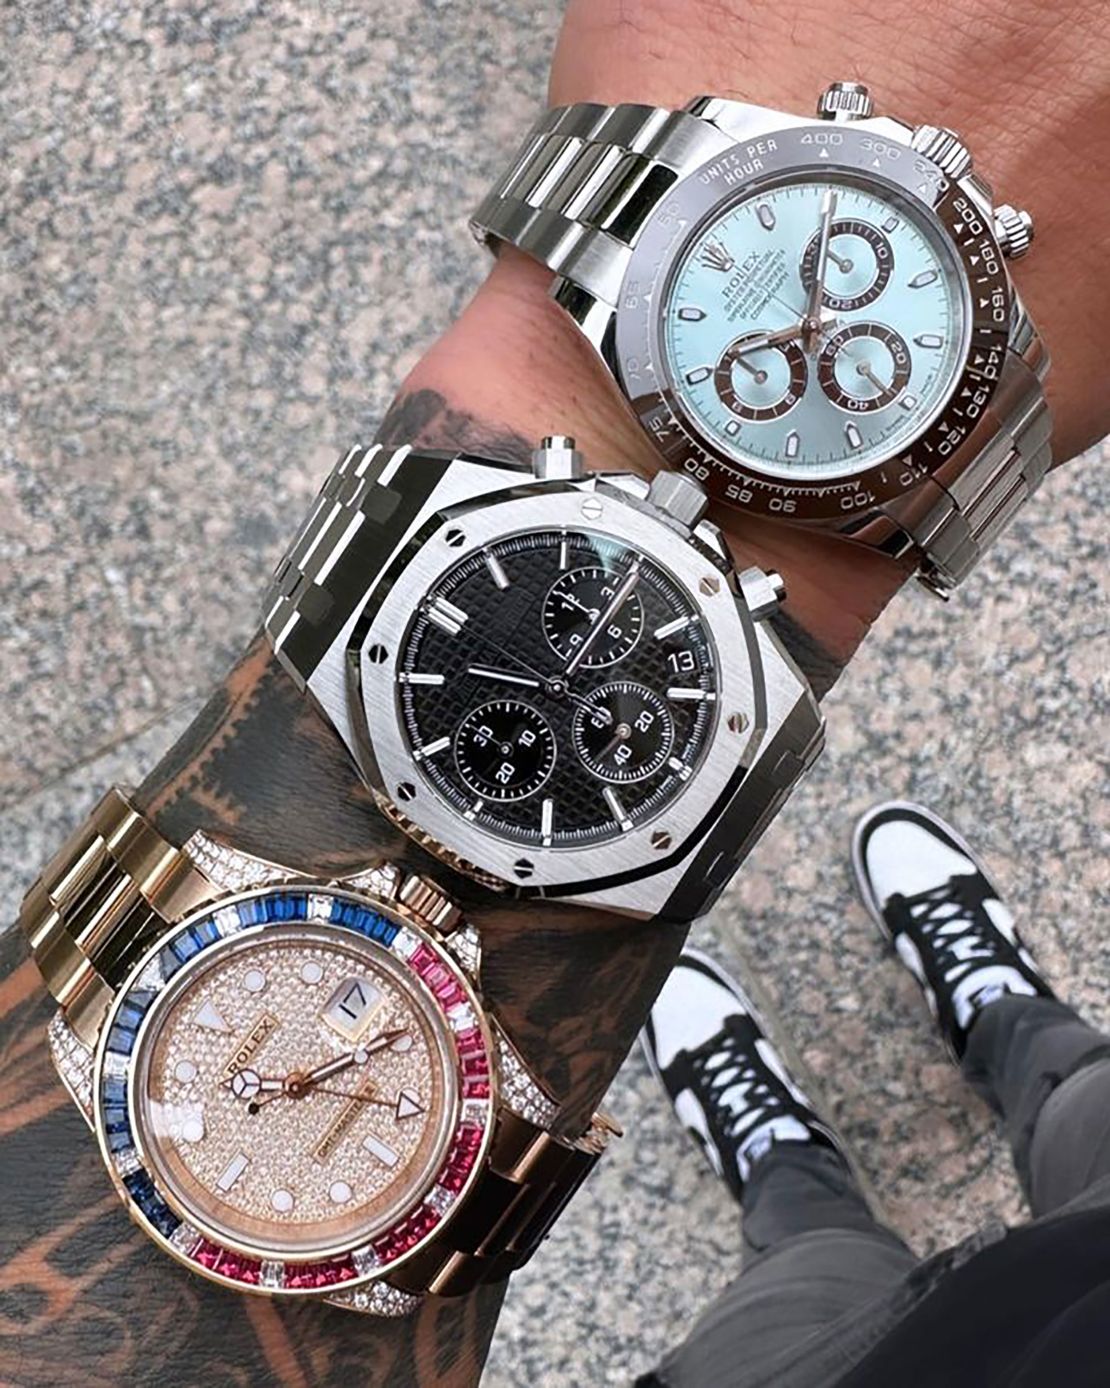 Anthony Farrer of LA’s The Timepiece Gentleman accused of scamming $3 ...